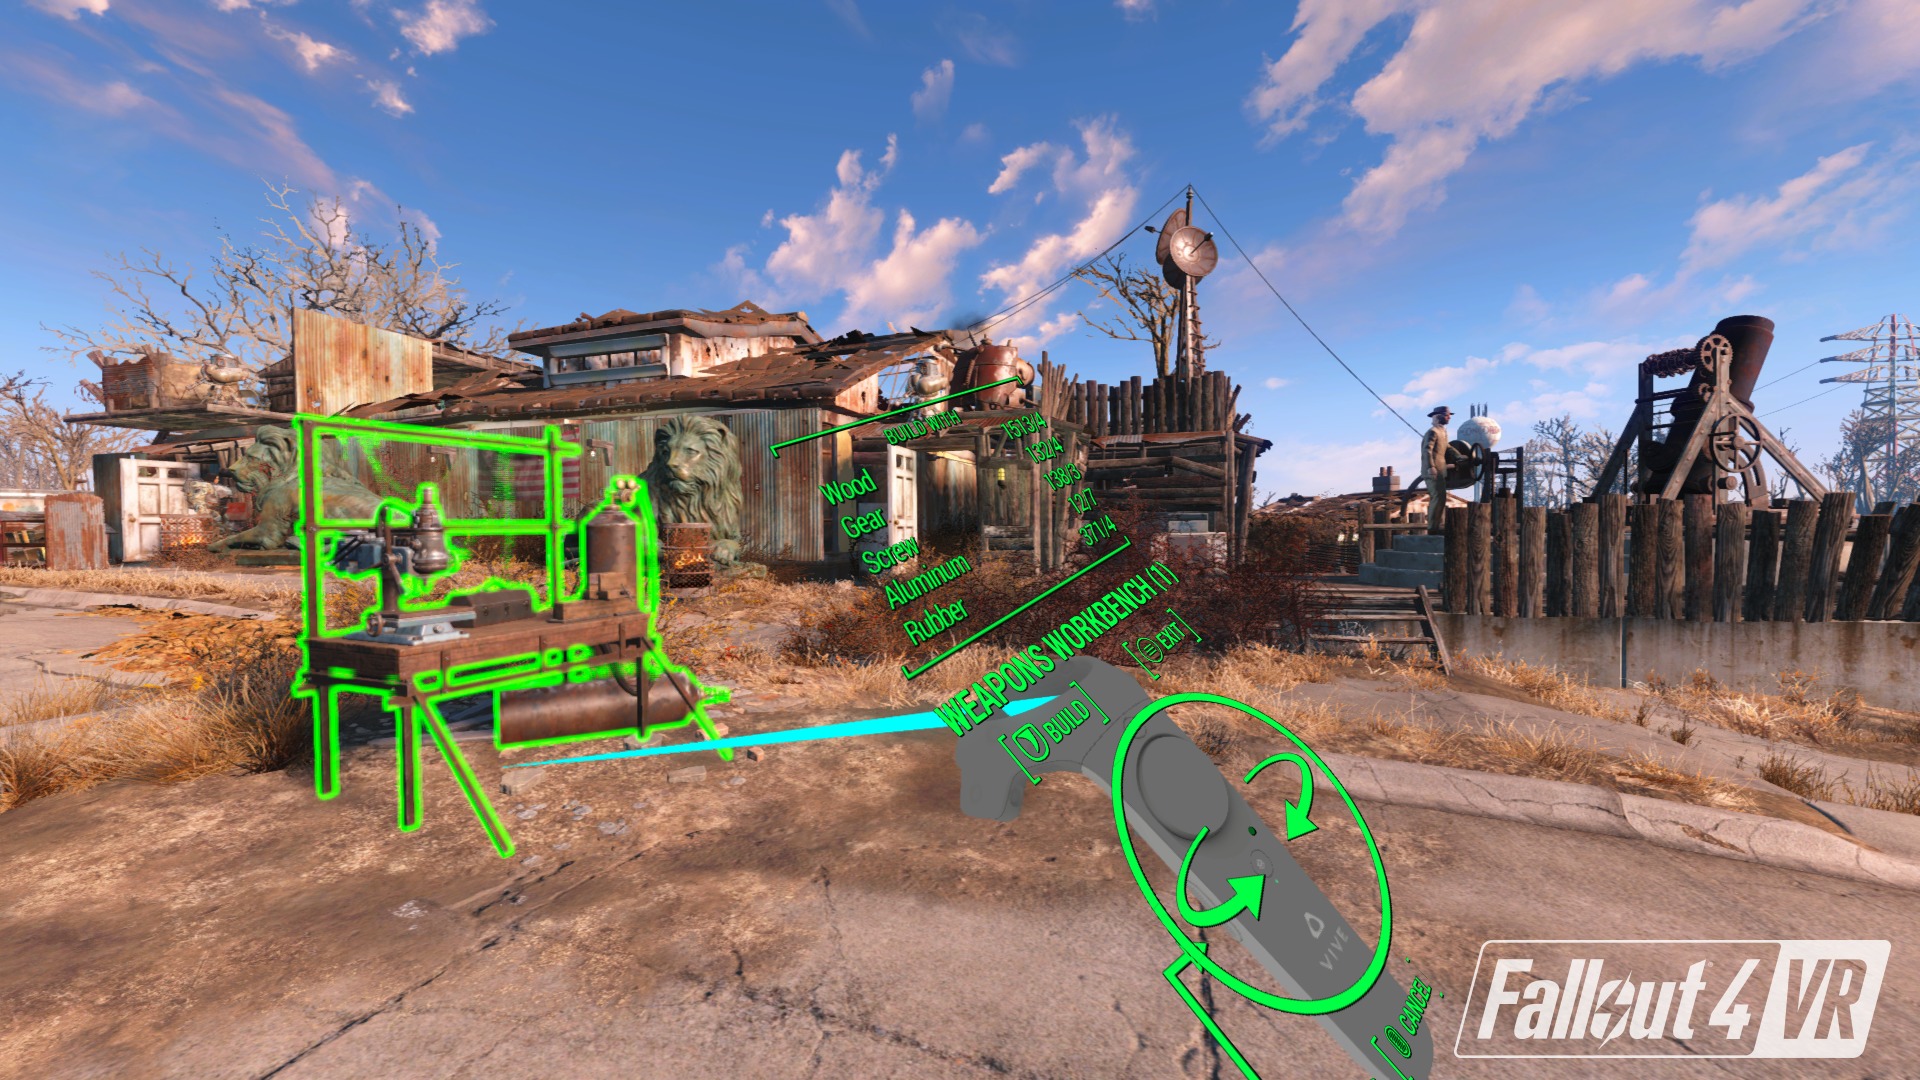 Fallout 4 vr mode construction